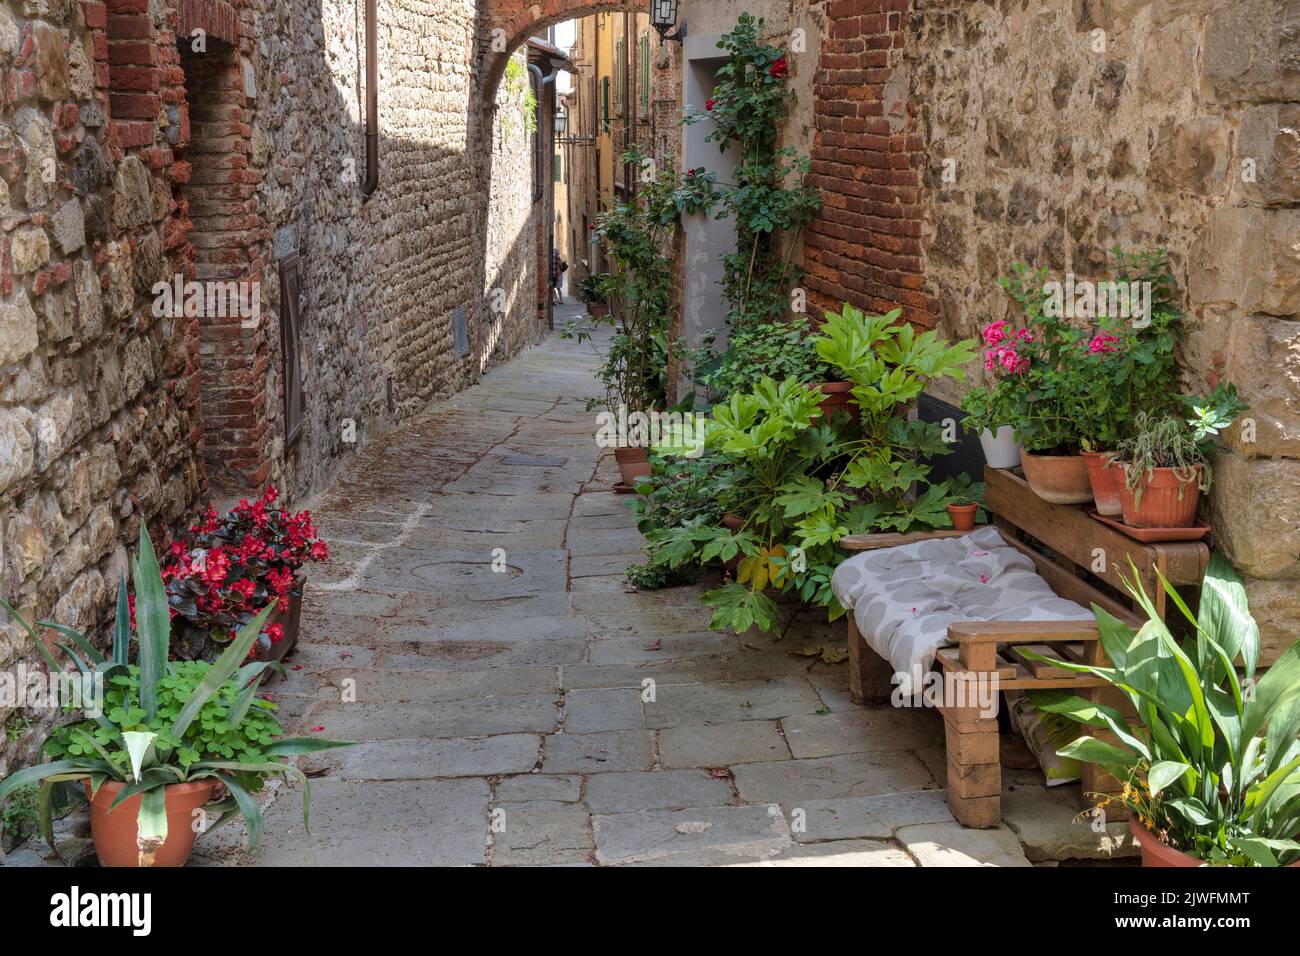 Floral display in a narrow alleyway in the medieval hilltop town of Lucignano in the Val di Chiana in Tuscany, Italy Stock Photo